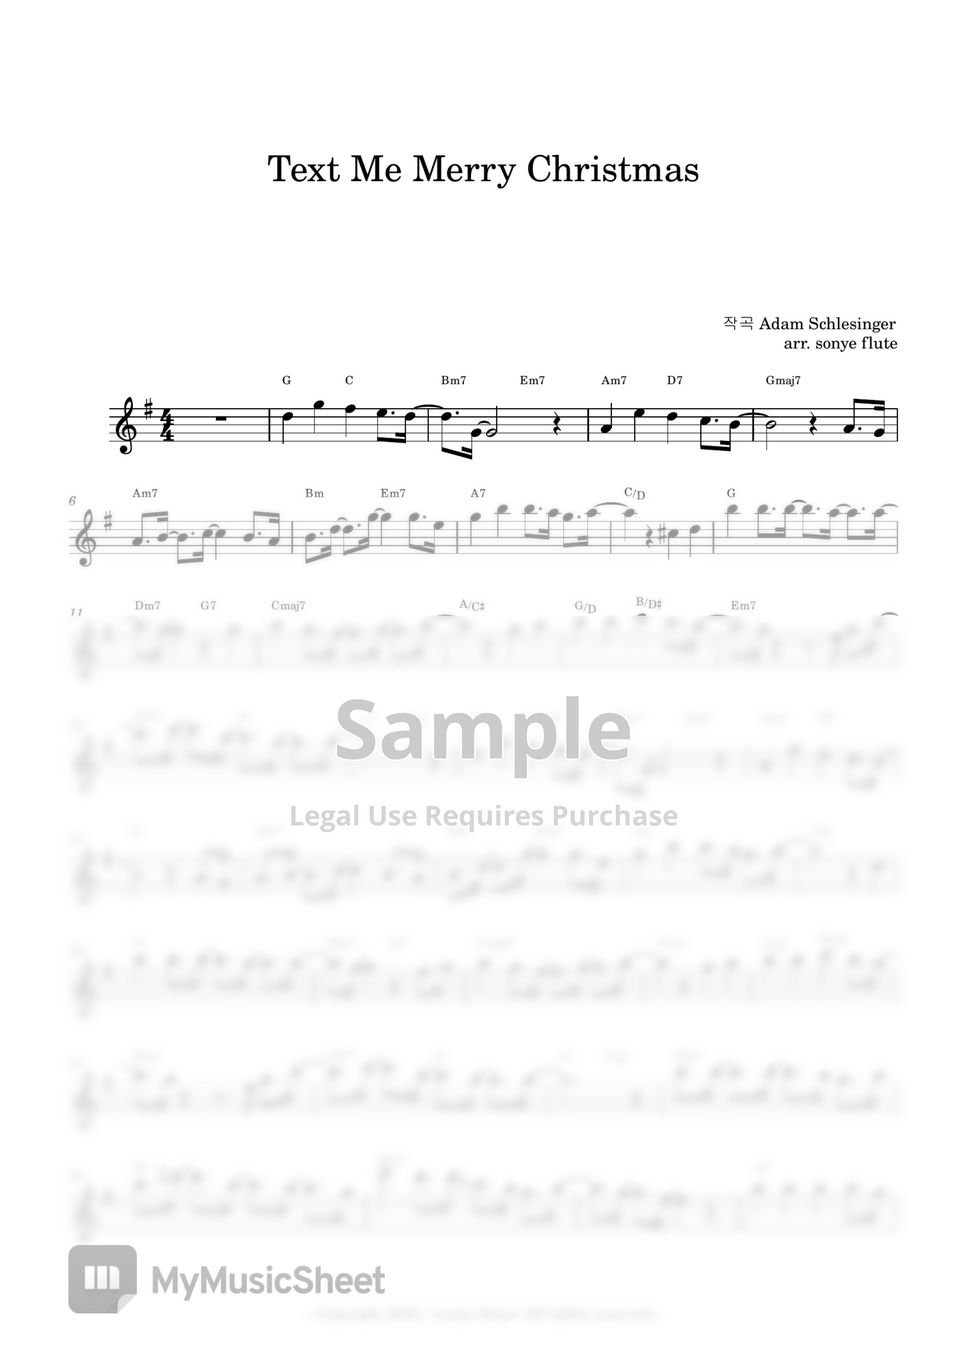 Straight No Chaser - Text Me Merry Christmas (Flute Sheet Music) by sonye flute